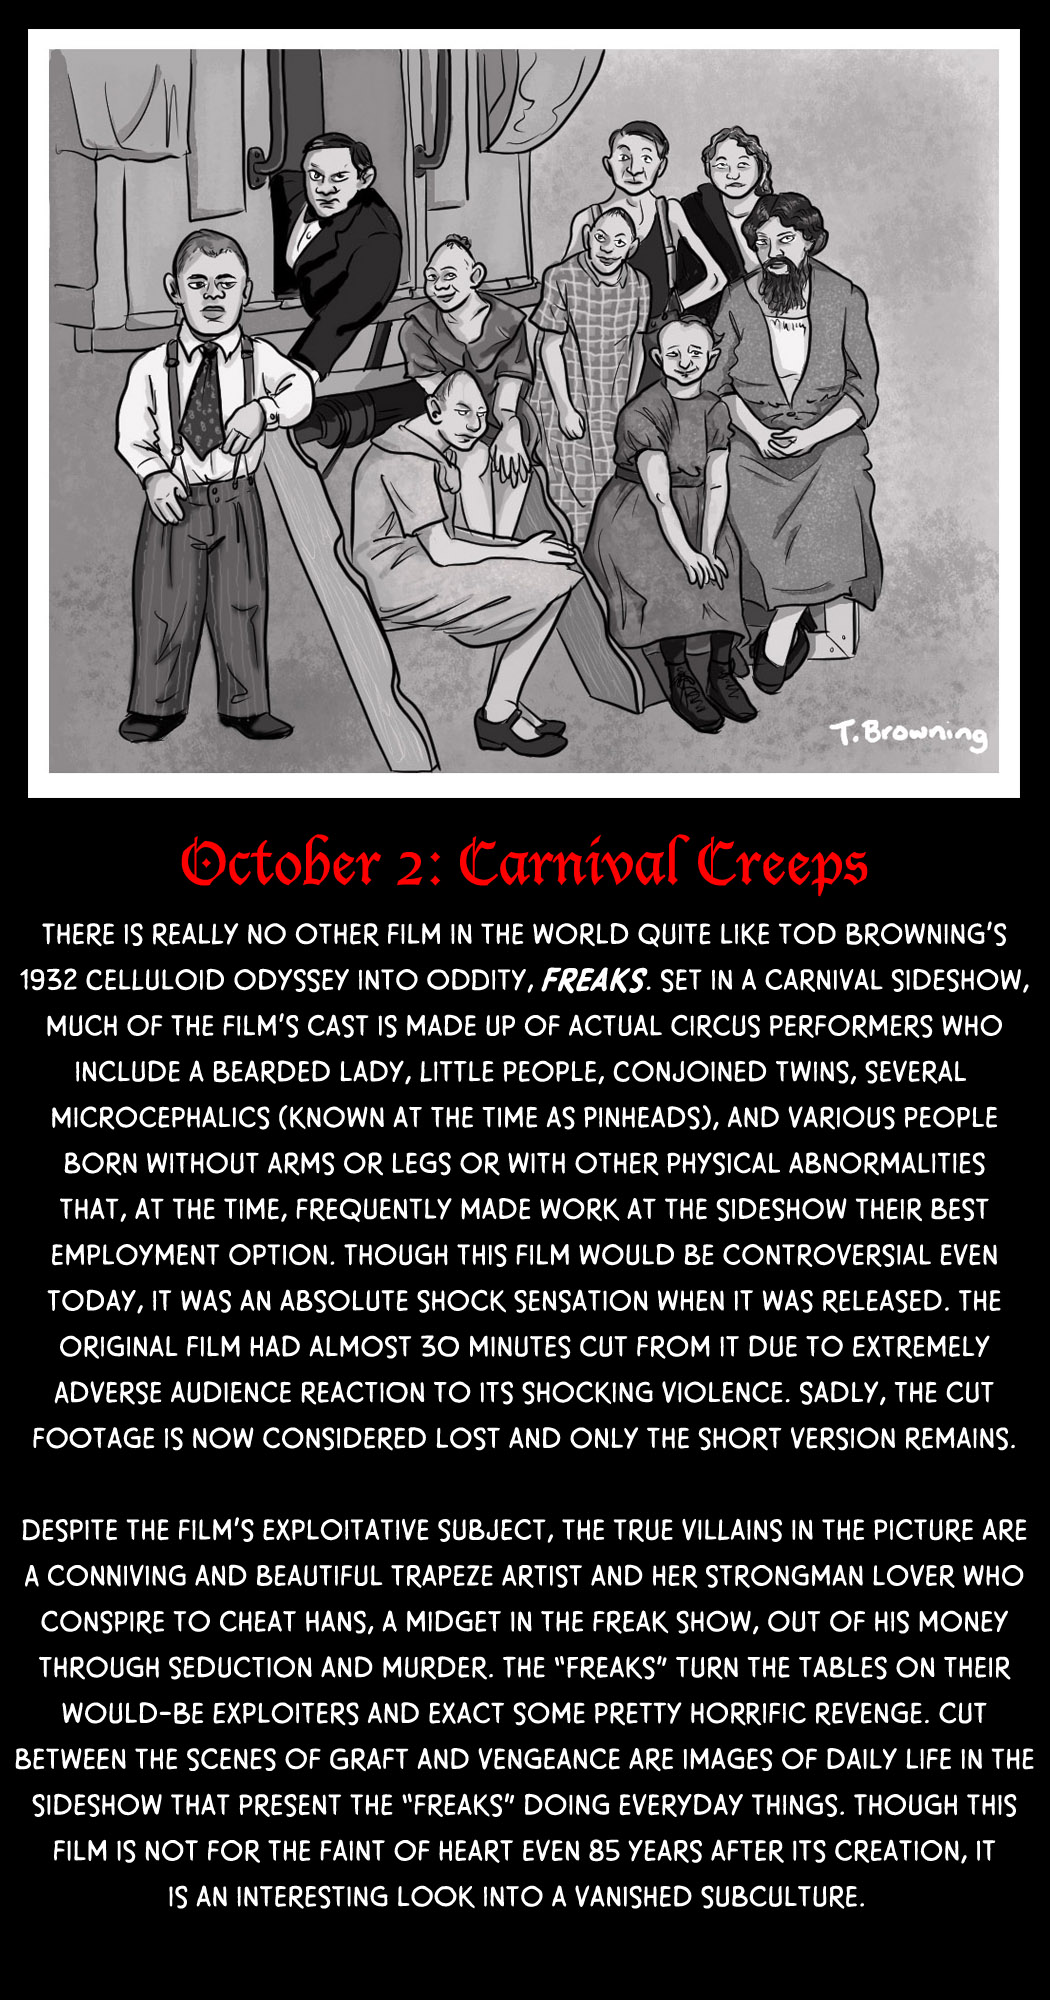 October 2: Carnival Creeps (Tod Browning’s Freaks)